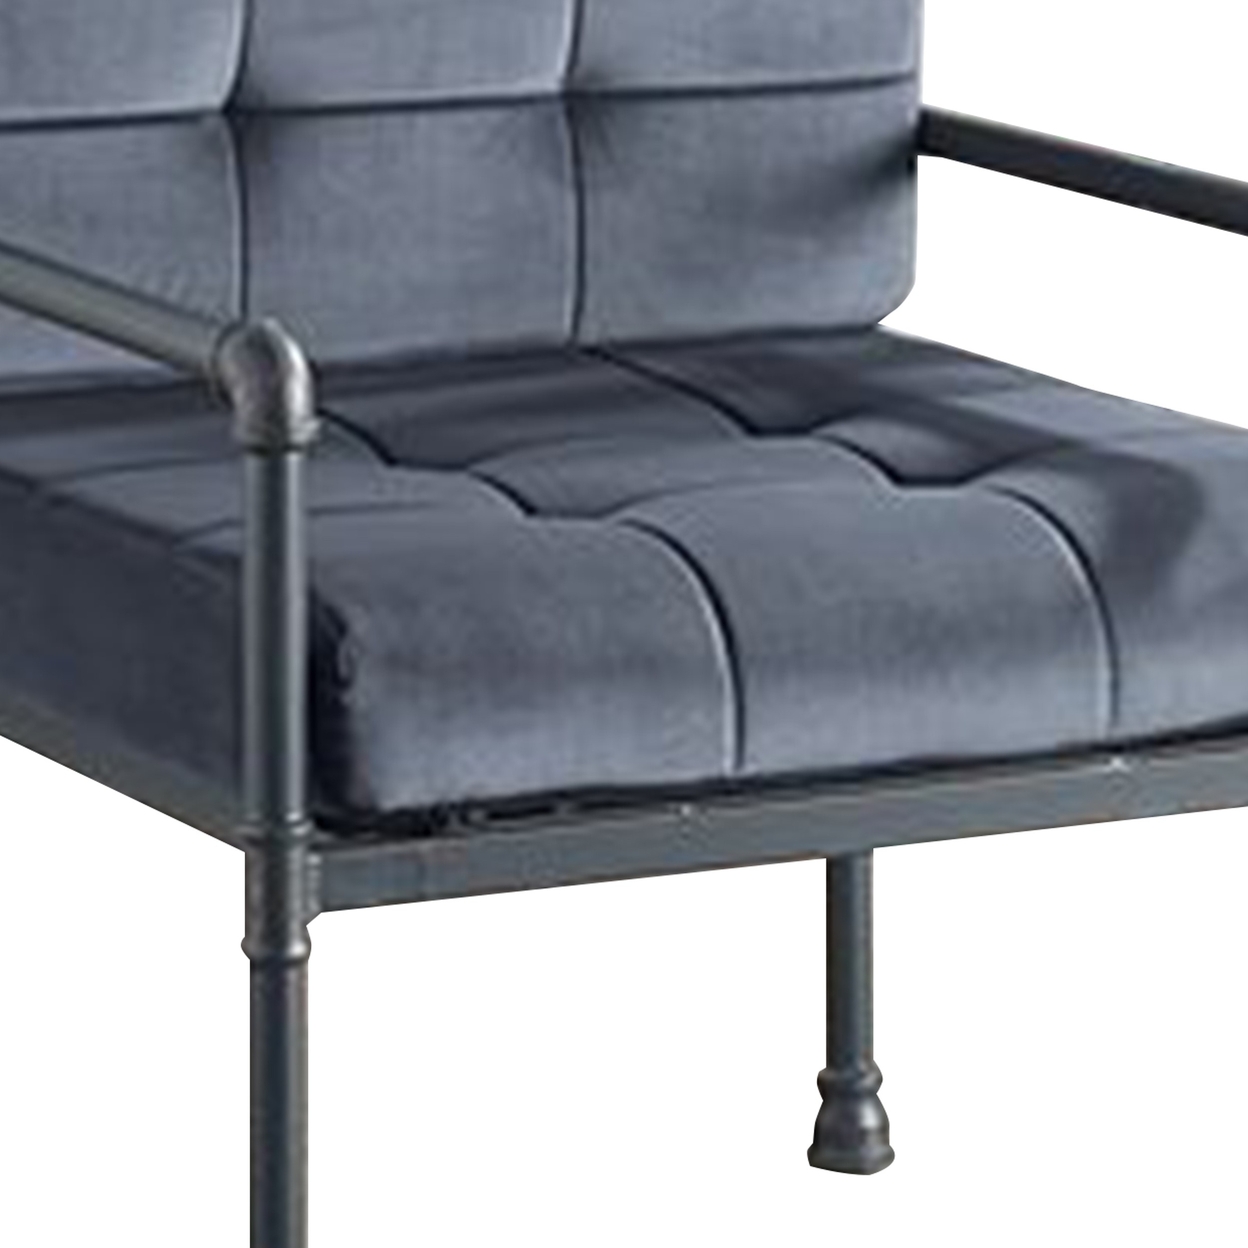 Accent Chair With Tufted Velvet Seat And Metal Frame, Gray- Saltoro Sherpi